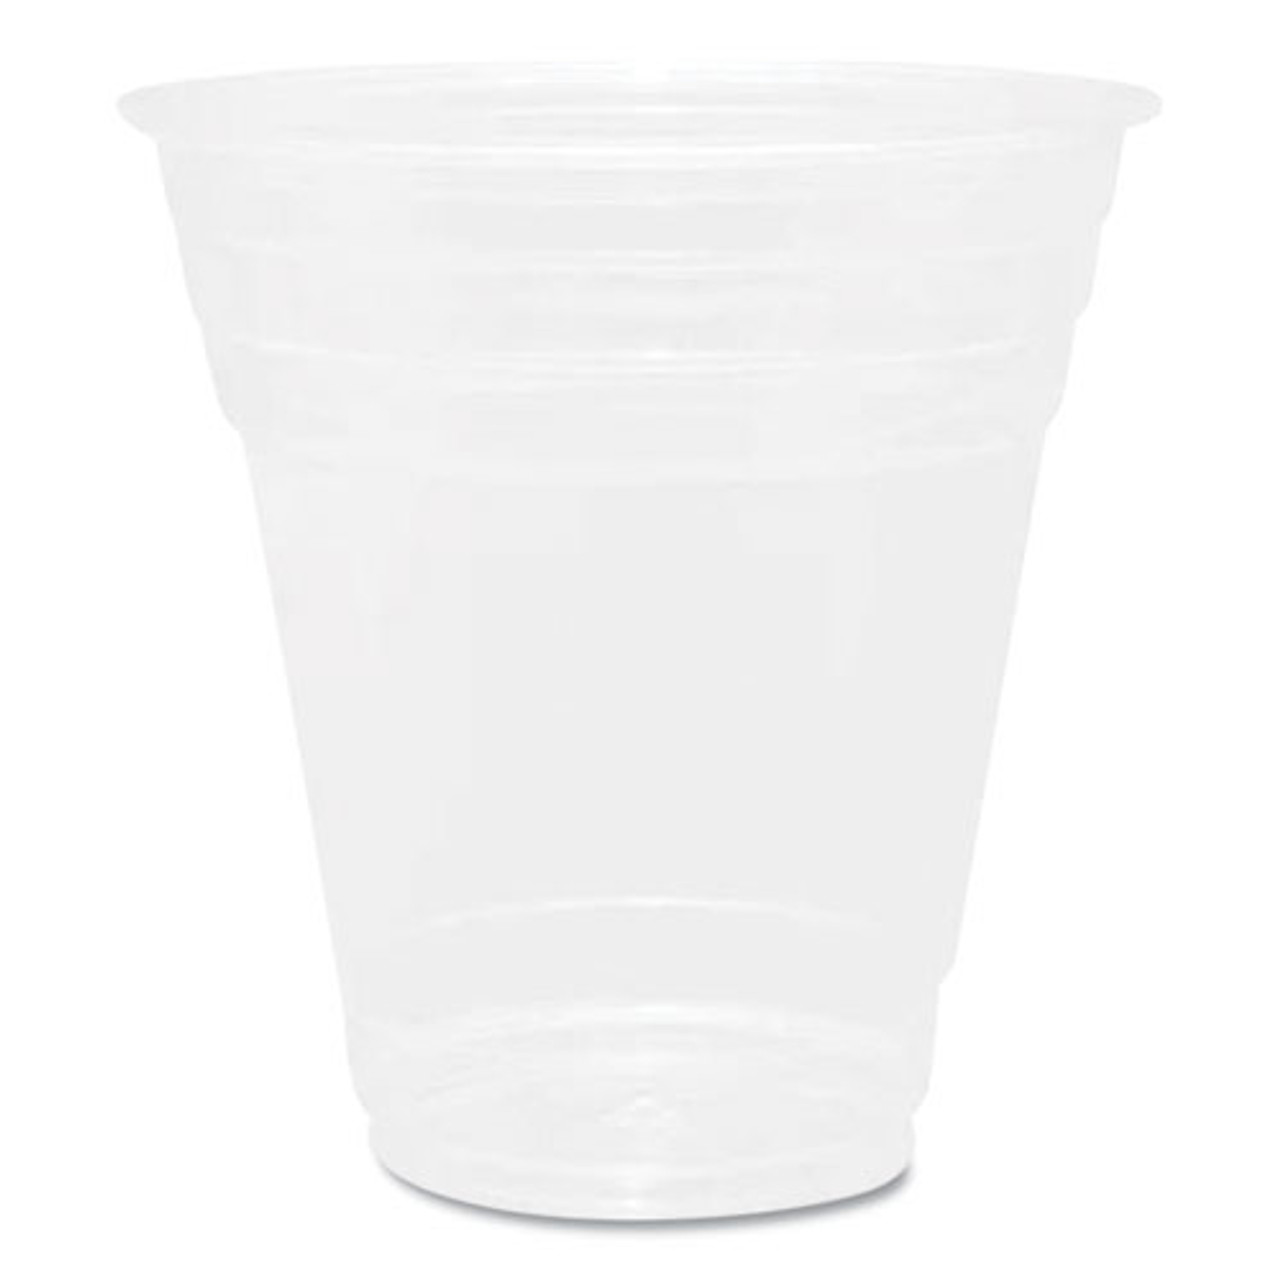 Clear Drinking Cups - Procure Products